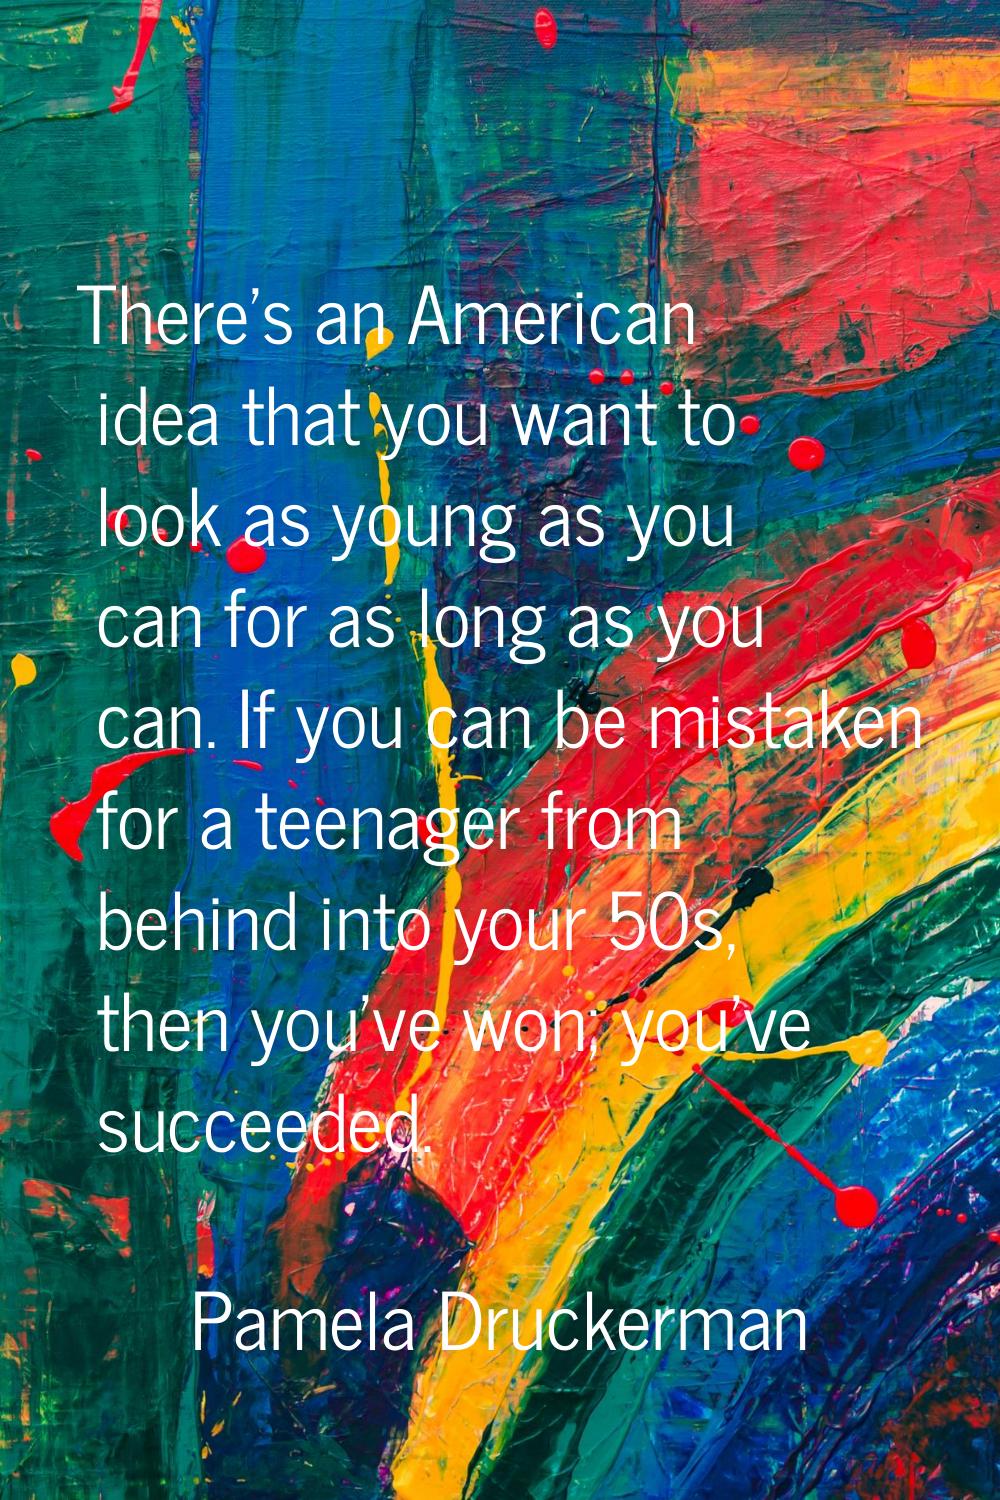 There's an American idea that you want to look as young as you can for as long as you can. If you c